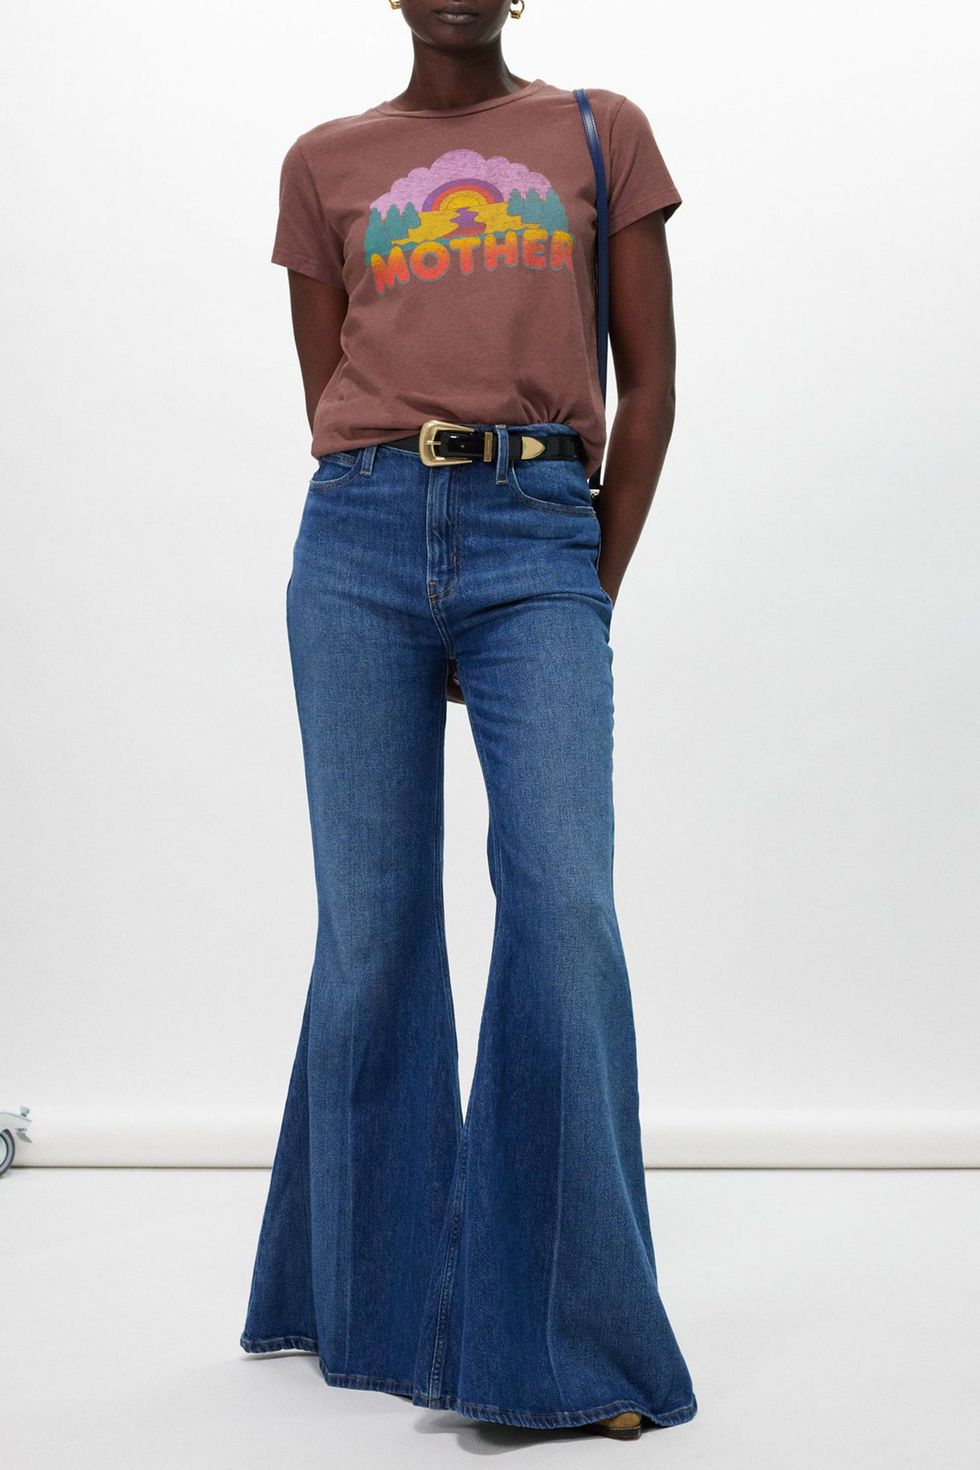 In the 1960s girls wore bellbottom jeans. these were in and